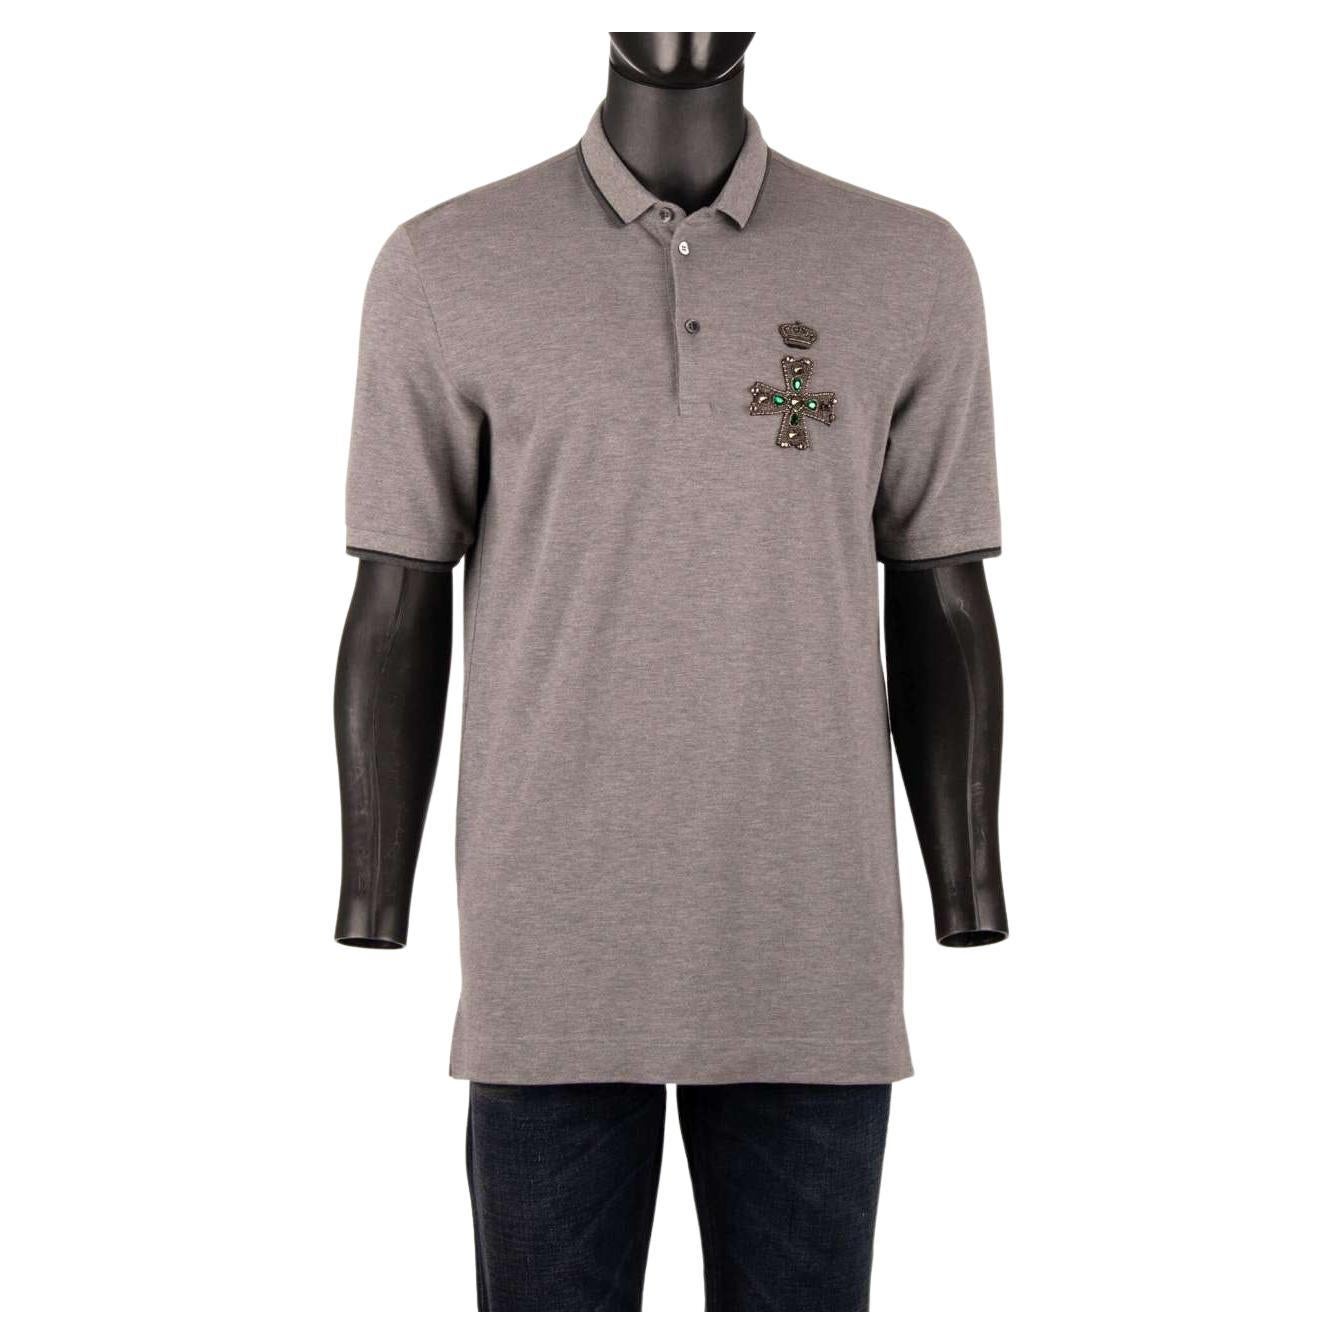 Dolce & Gabbana - Cotton Polo Shirt with Embroidered Crystals Cross Gray 48 M For Sale